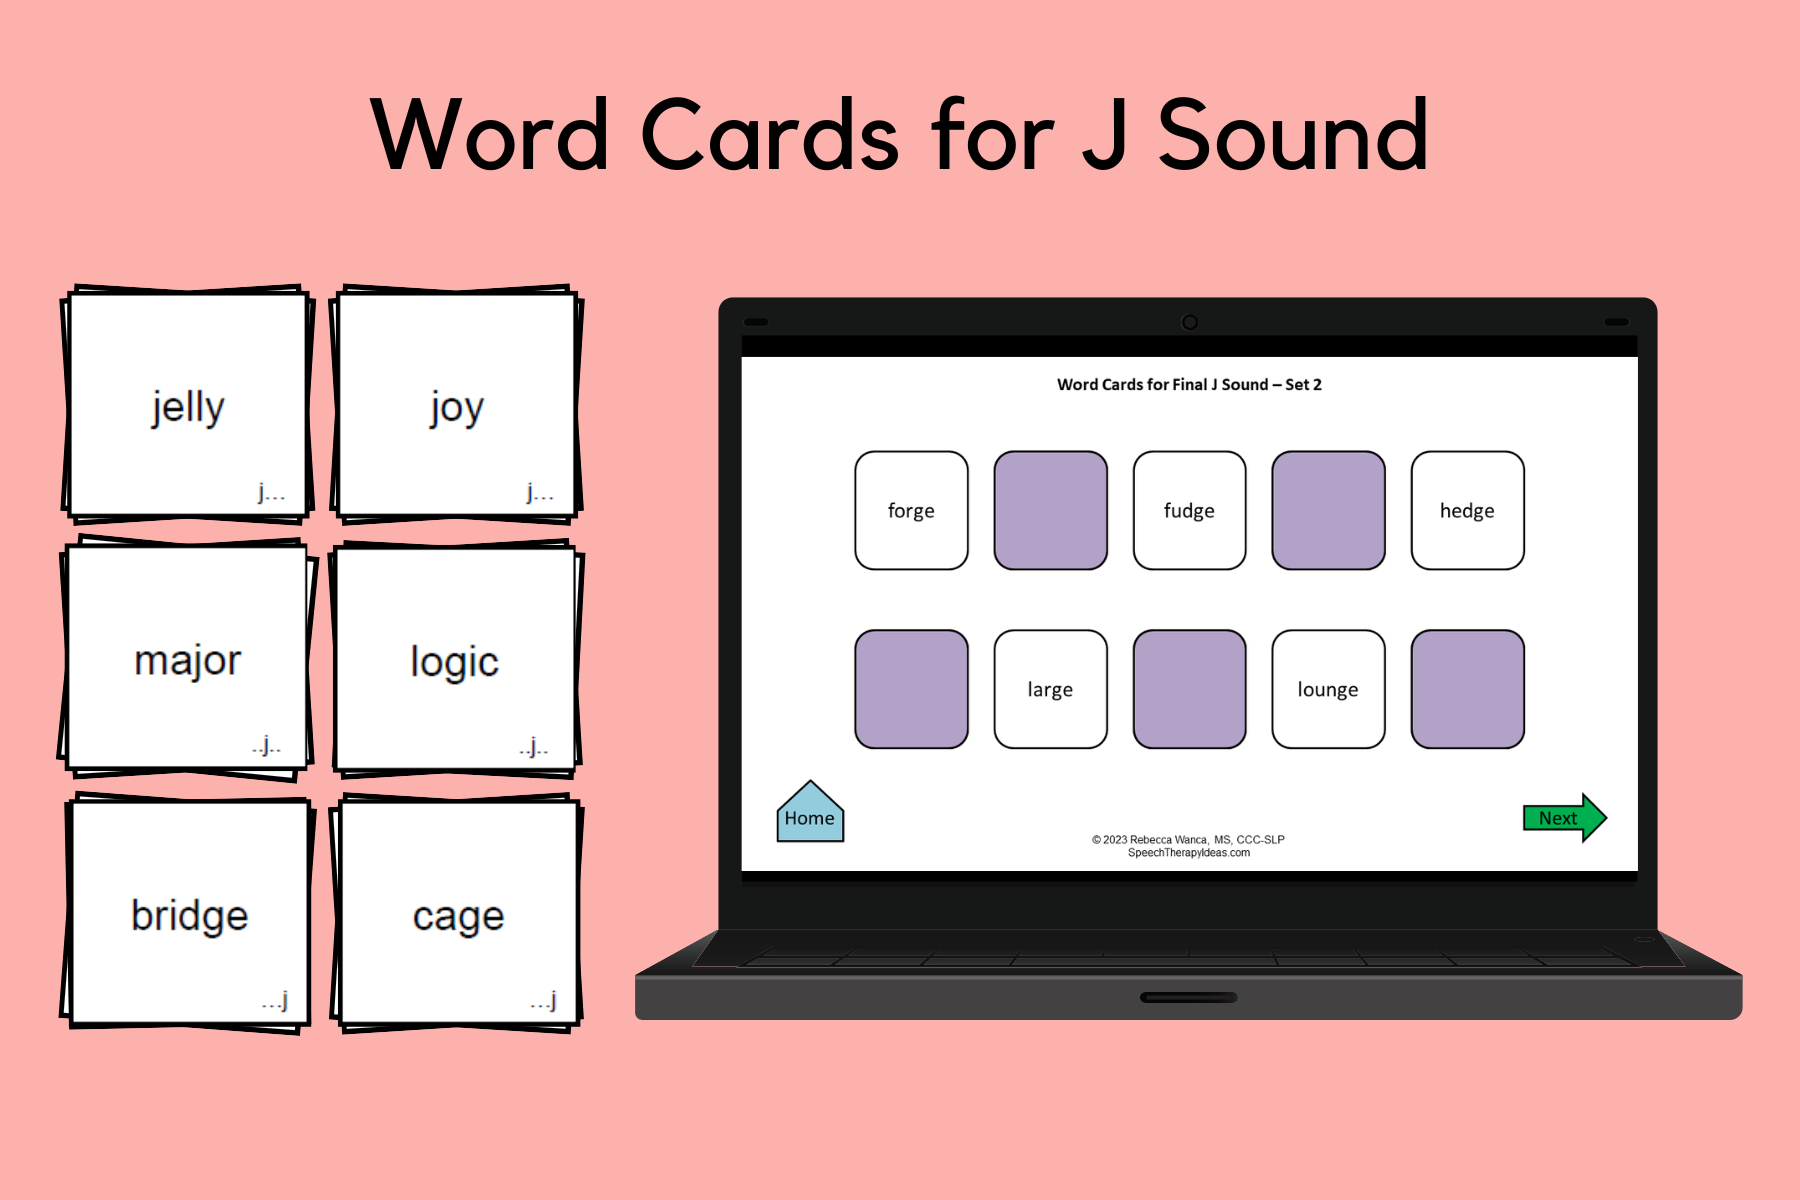 Word Cards for J Sound